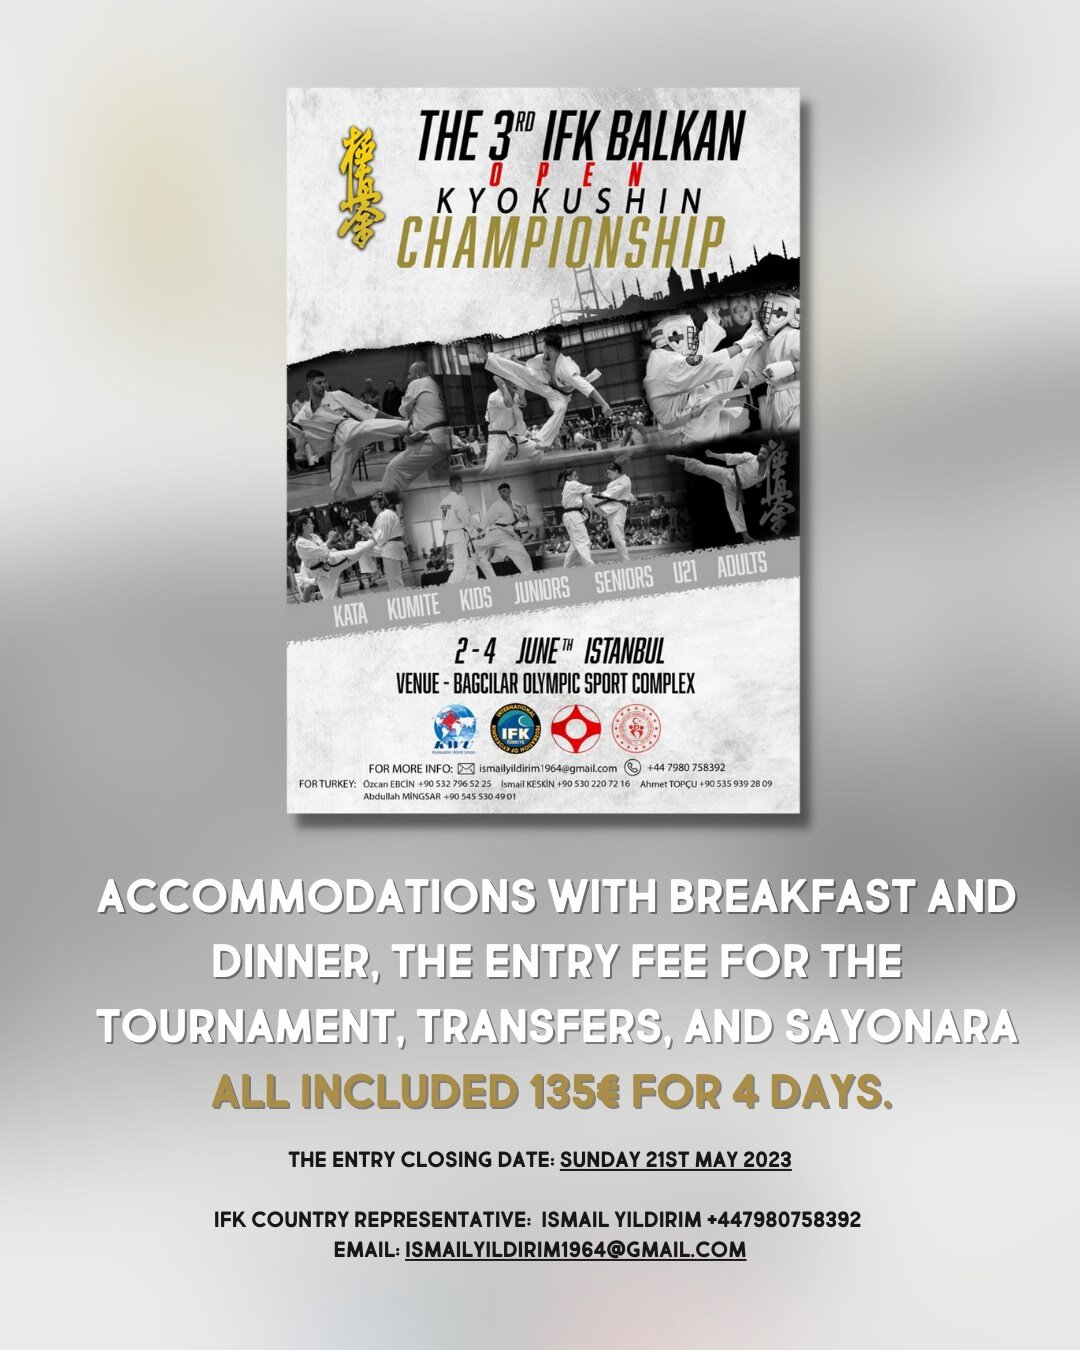 Enjoy four days of the tournament, accommodation with breakfast and dinner included, transfers to and from the venue, and a sayonara for only 135&euro;!

THE ENTRY CLOSING DATE IS SUNDAY 21ST MAY 2023

ORGANIZER Website: www.ifkturkey.com 

Country R